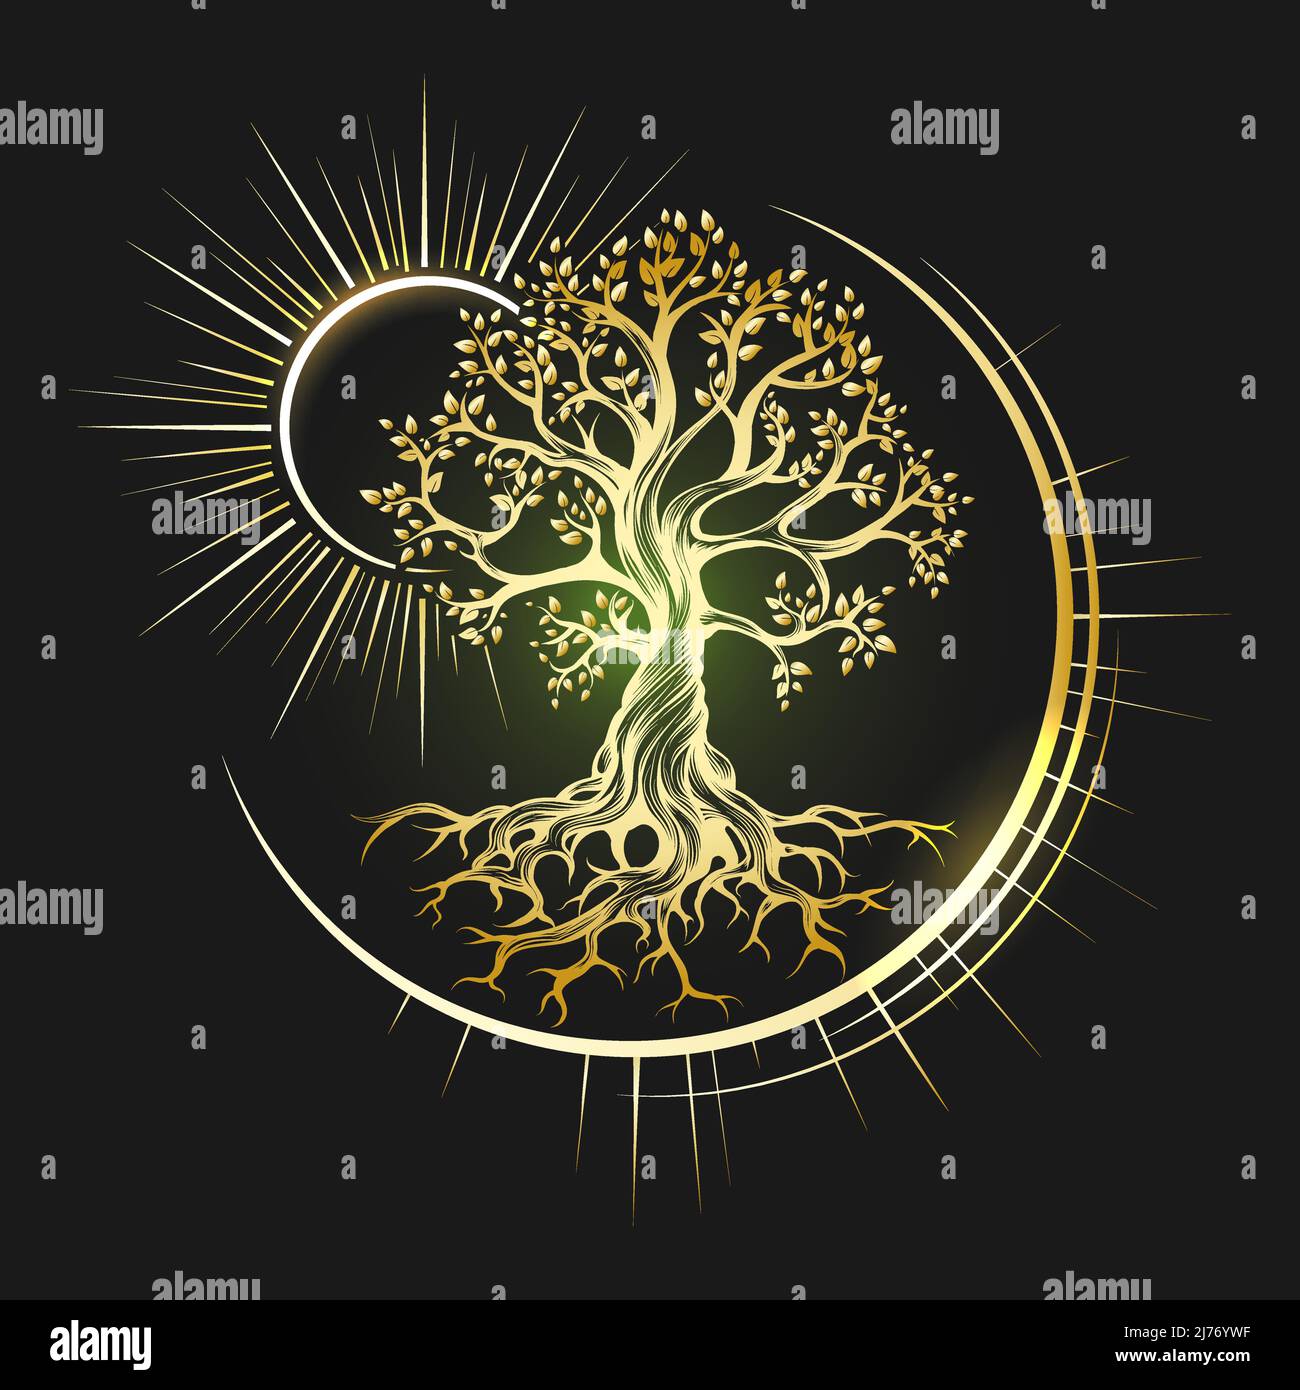 Emblem of Esoteric Symbol Golden Tree of Life isolated on black background. Vector illustration. Stock Vector